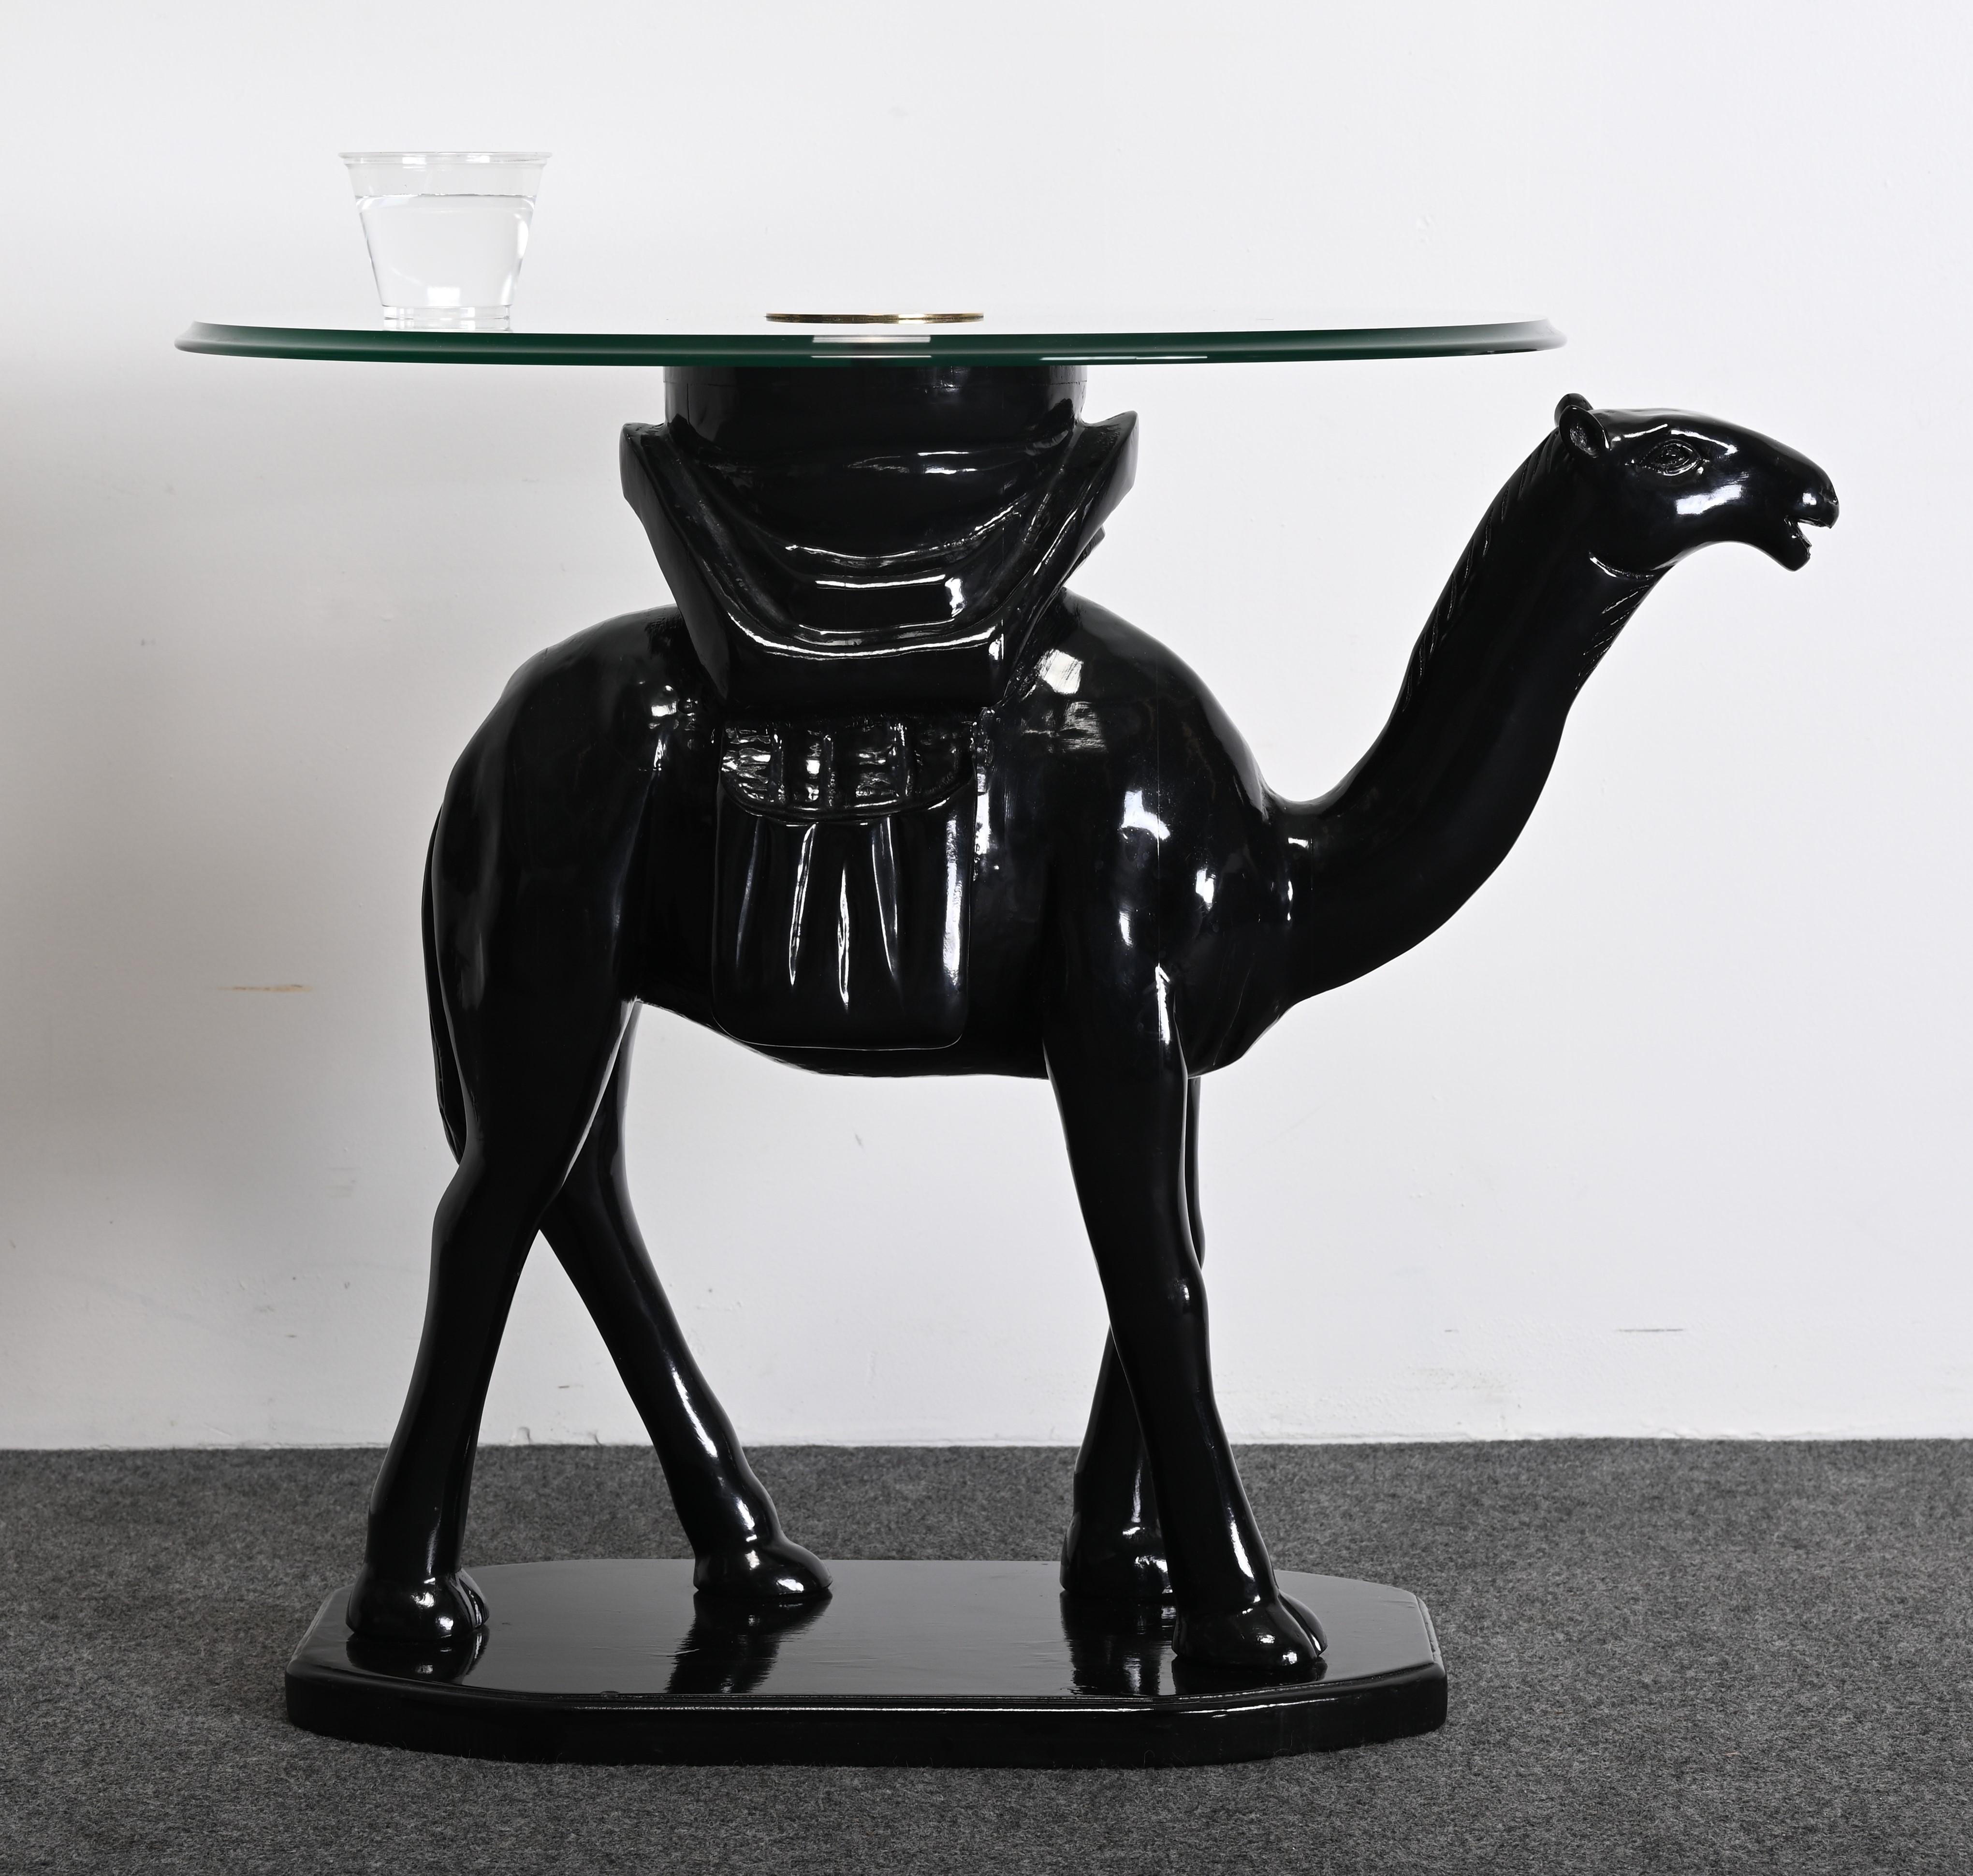 A whimsical Post-Modern side table with a glass top and brass accent. This camel-themed black lacquered side table or cocktail table is made of hand-carved wood. The occasional table came out of a 1980s-designed interior which was accompanied with